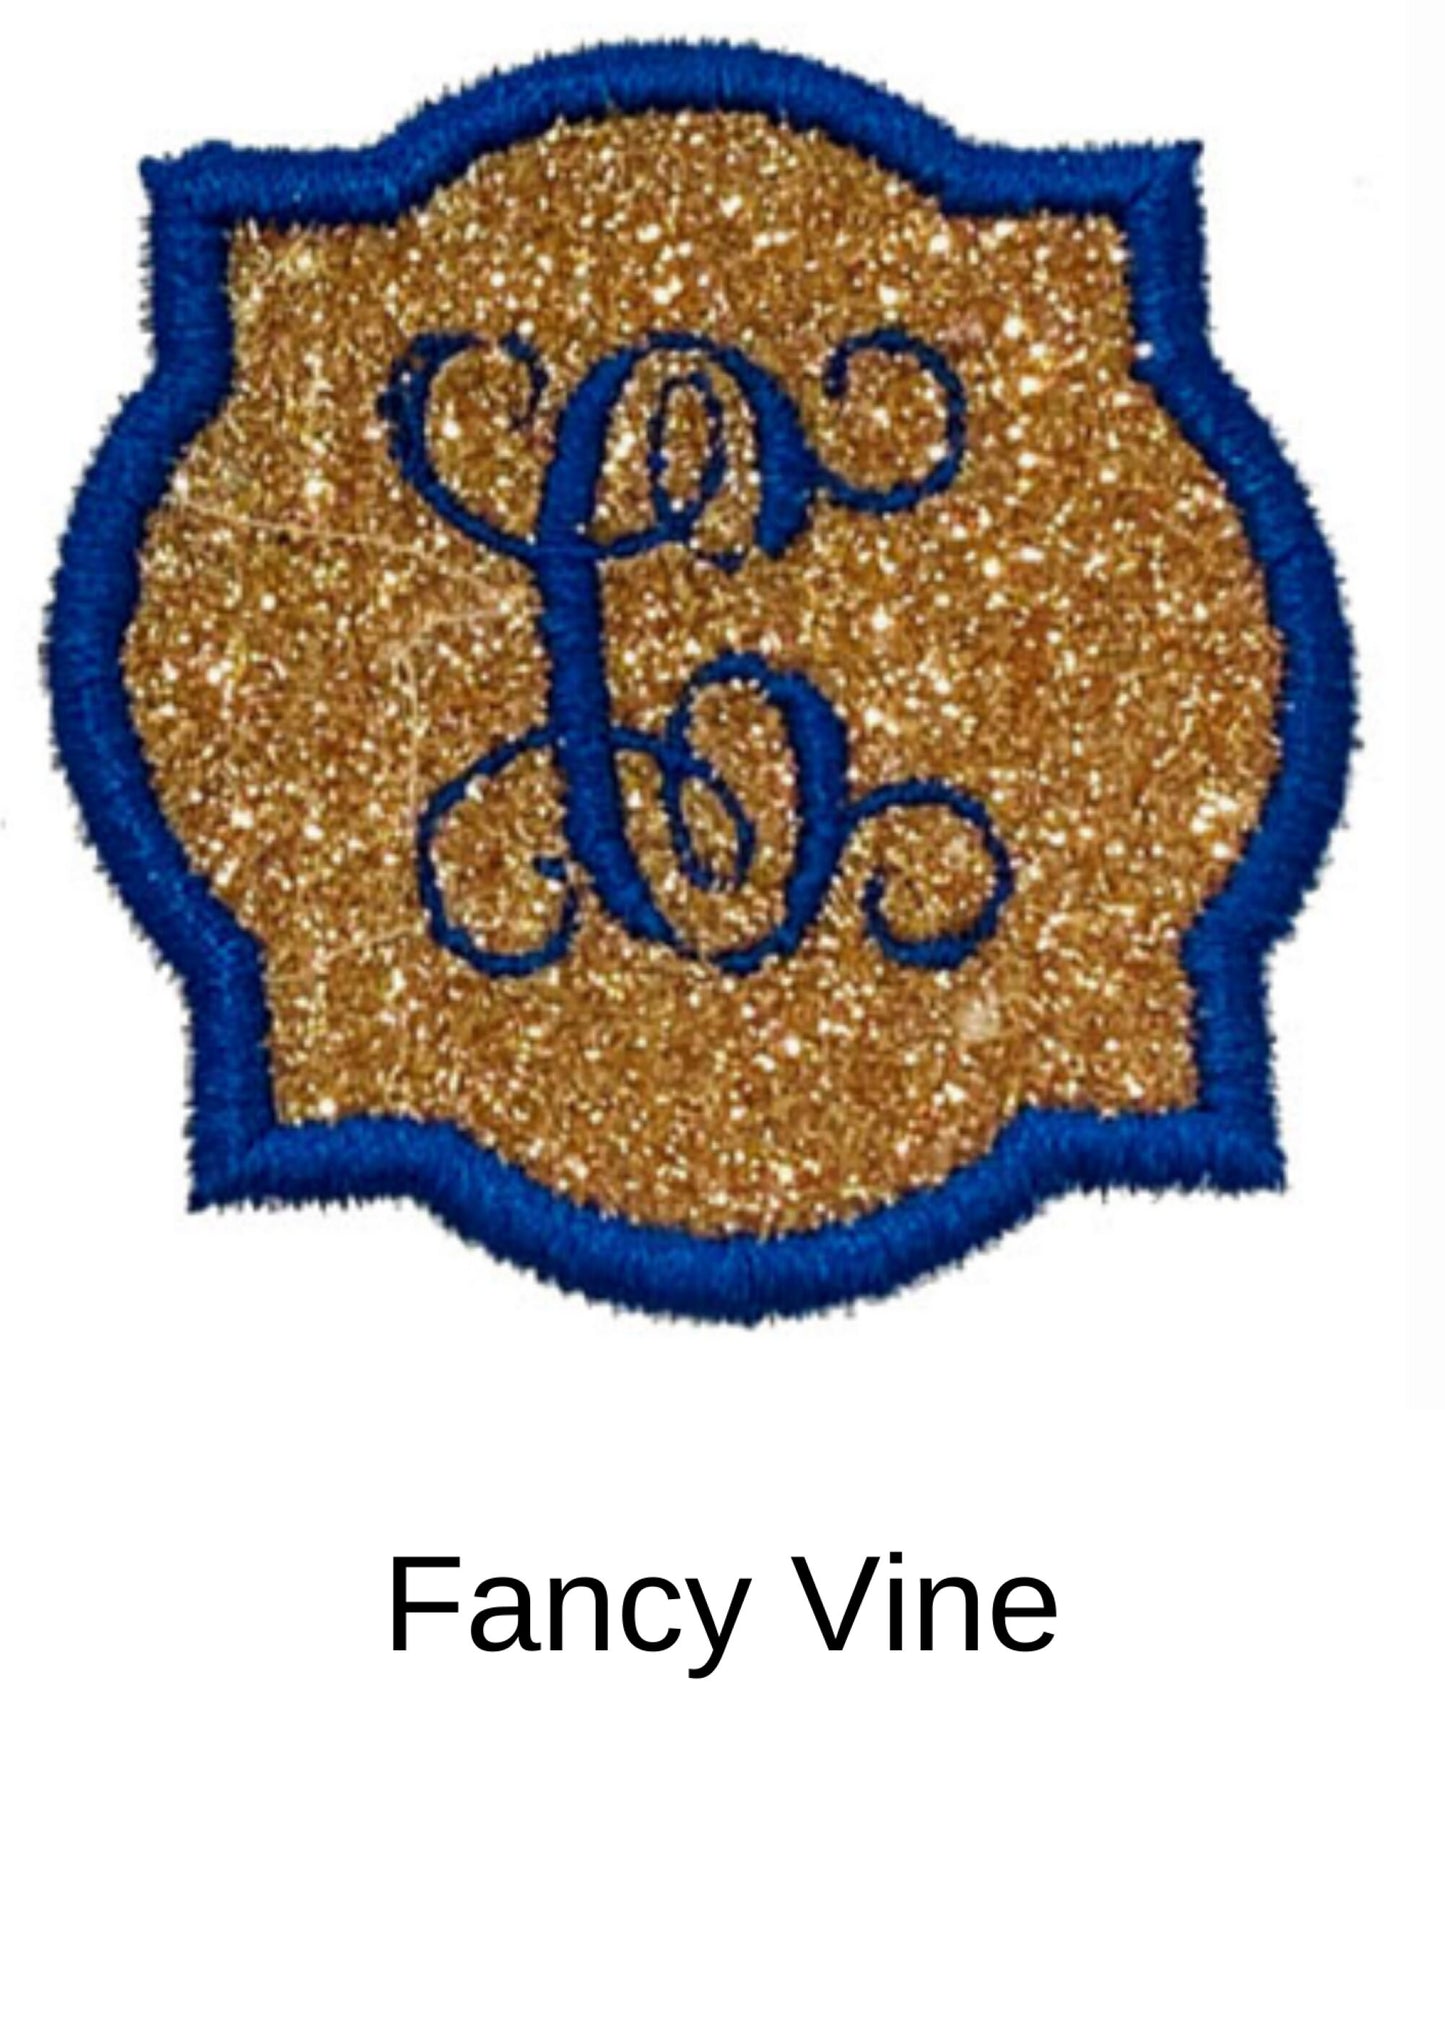 Fancy Glitter initial patch glitter patch with initial glitter patch glitter with monogram personalized patch glitter iron on patch GL435